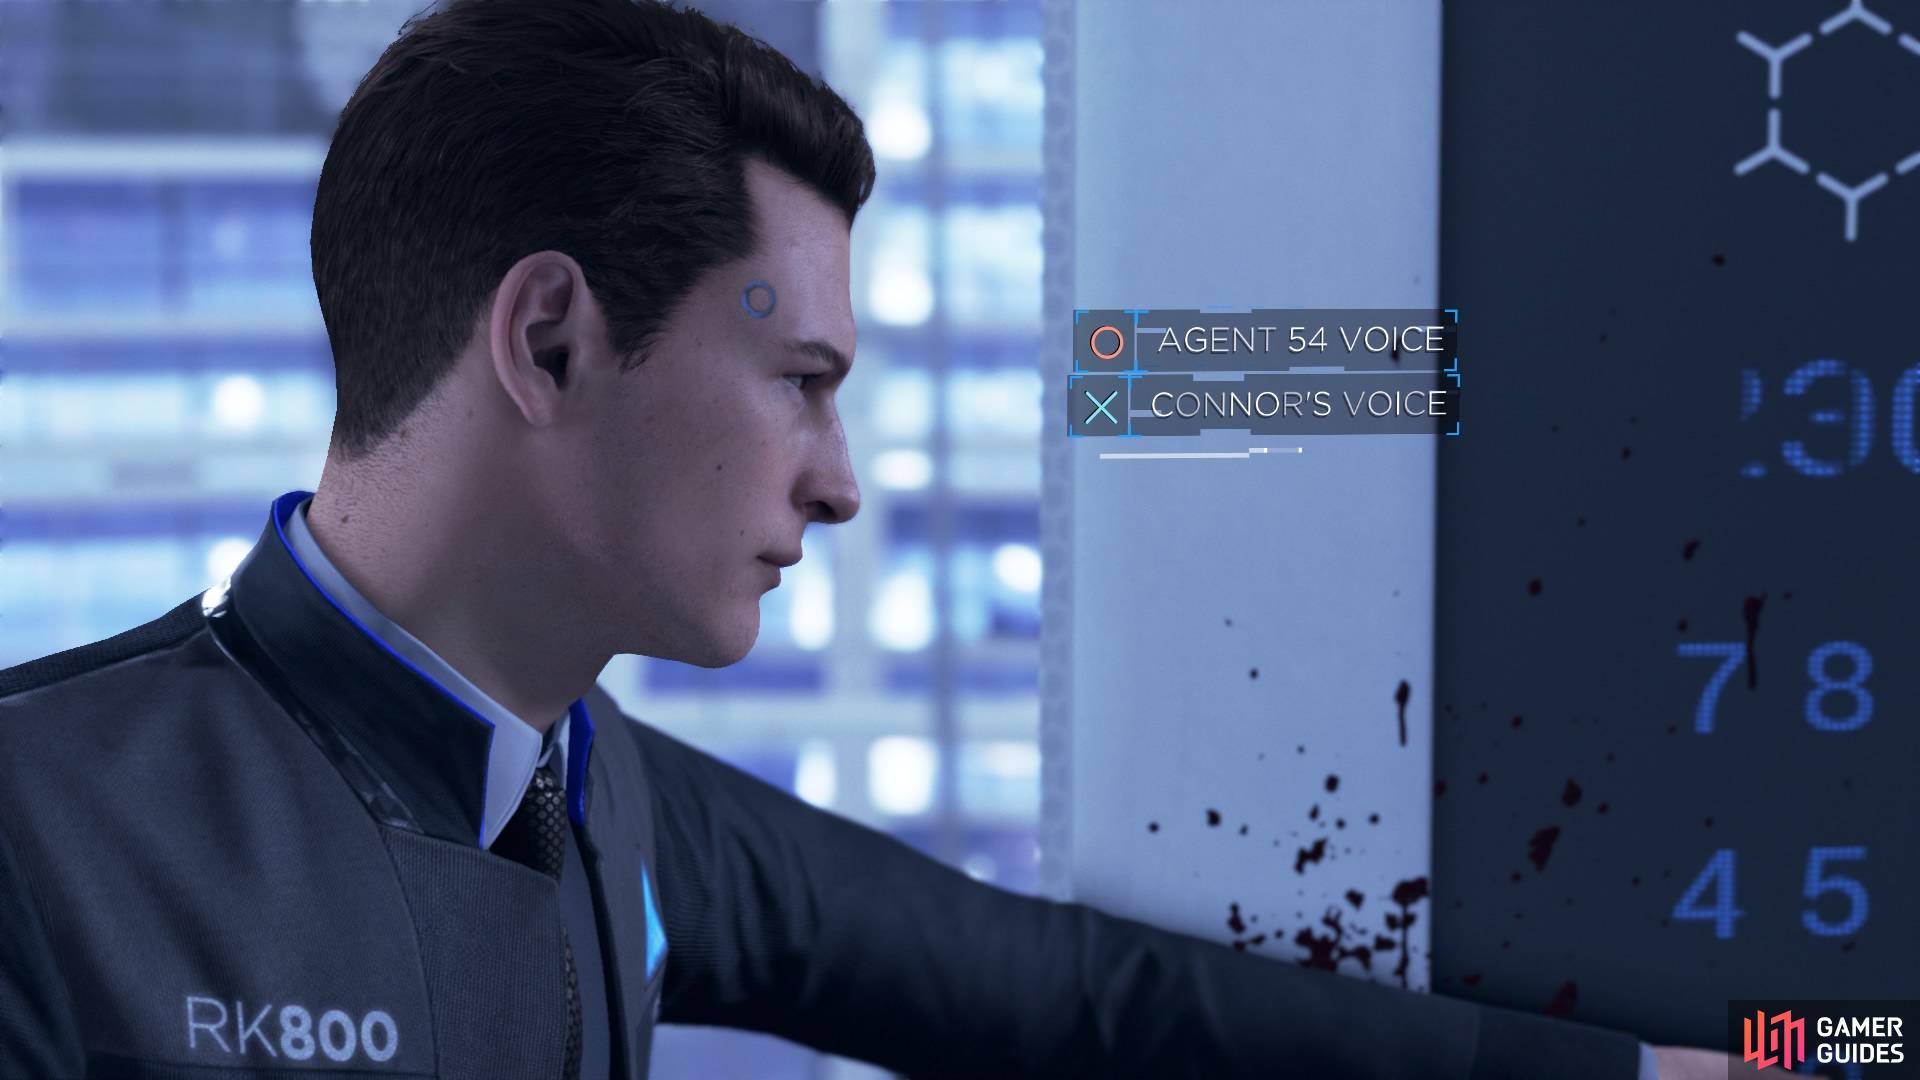 Detroit: Become Human Trophy Guide and Roadmap